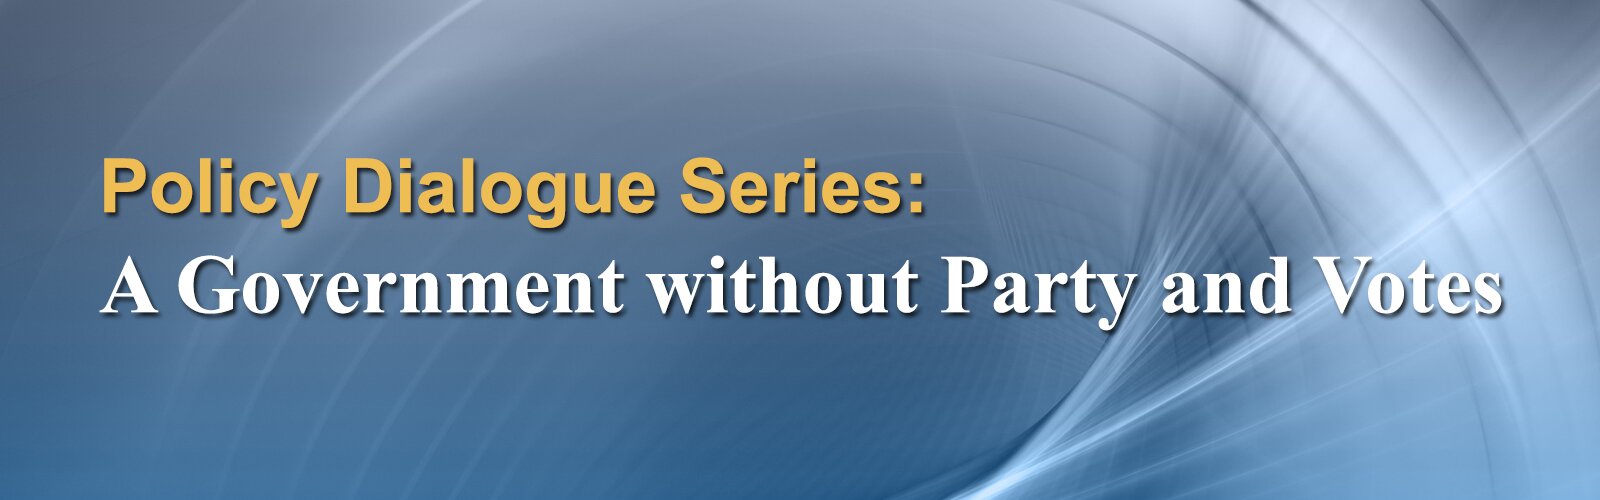 Policy Dialogue Series: A Government without Party and Votes